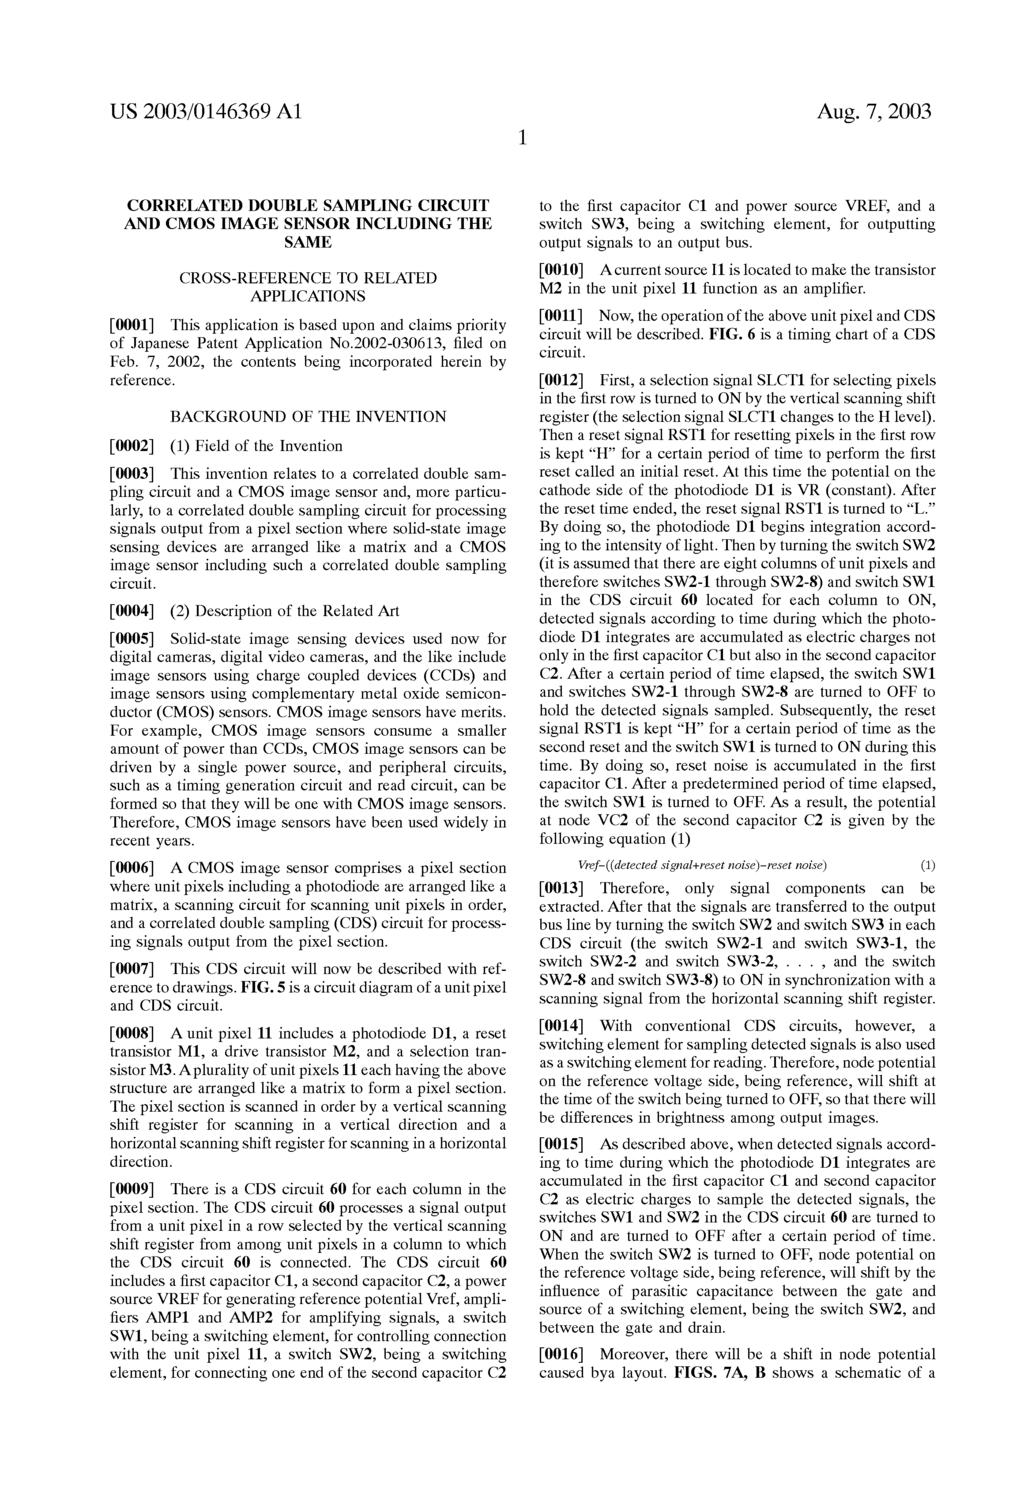 US 2003/O146369 A1 Aug. 7, 2003 CORRELATED DOUBLE SAMPLING CIRCUIT AND CMOS IMAGE SENSOR INCLUDING THE SAME CROSS-REFERENCE TO RELATED APPLICATIONS 0001.